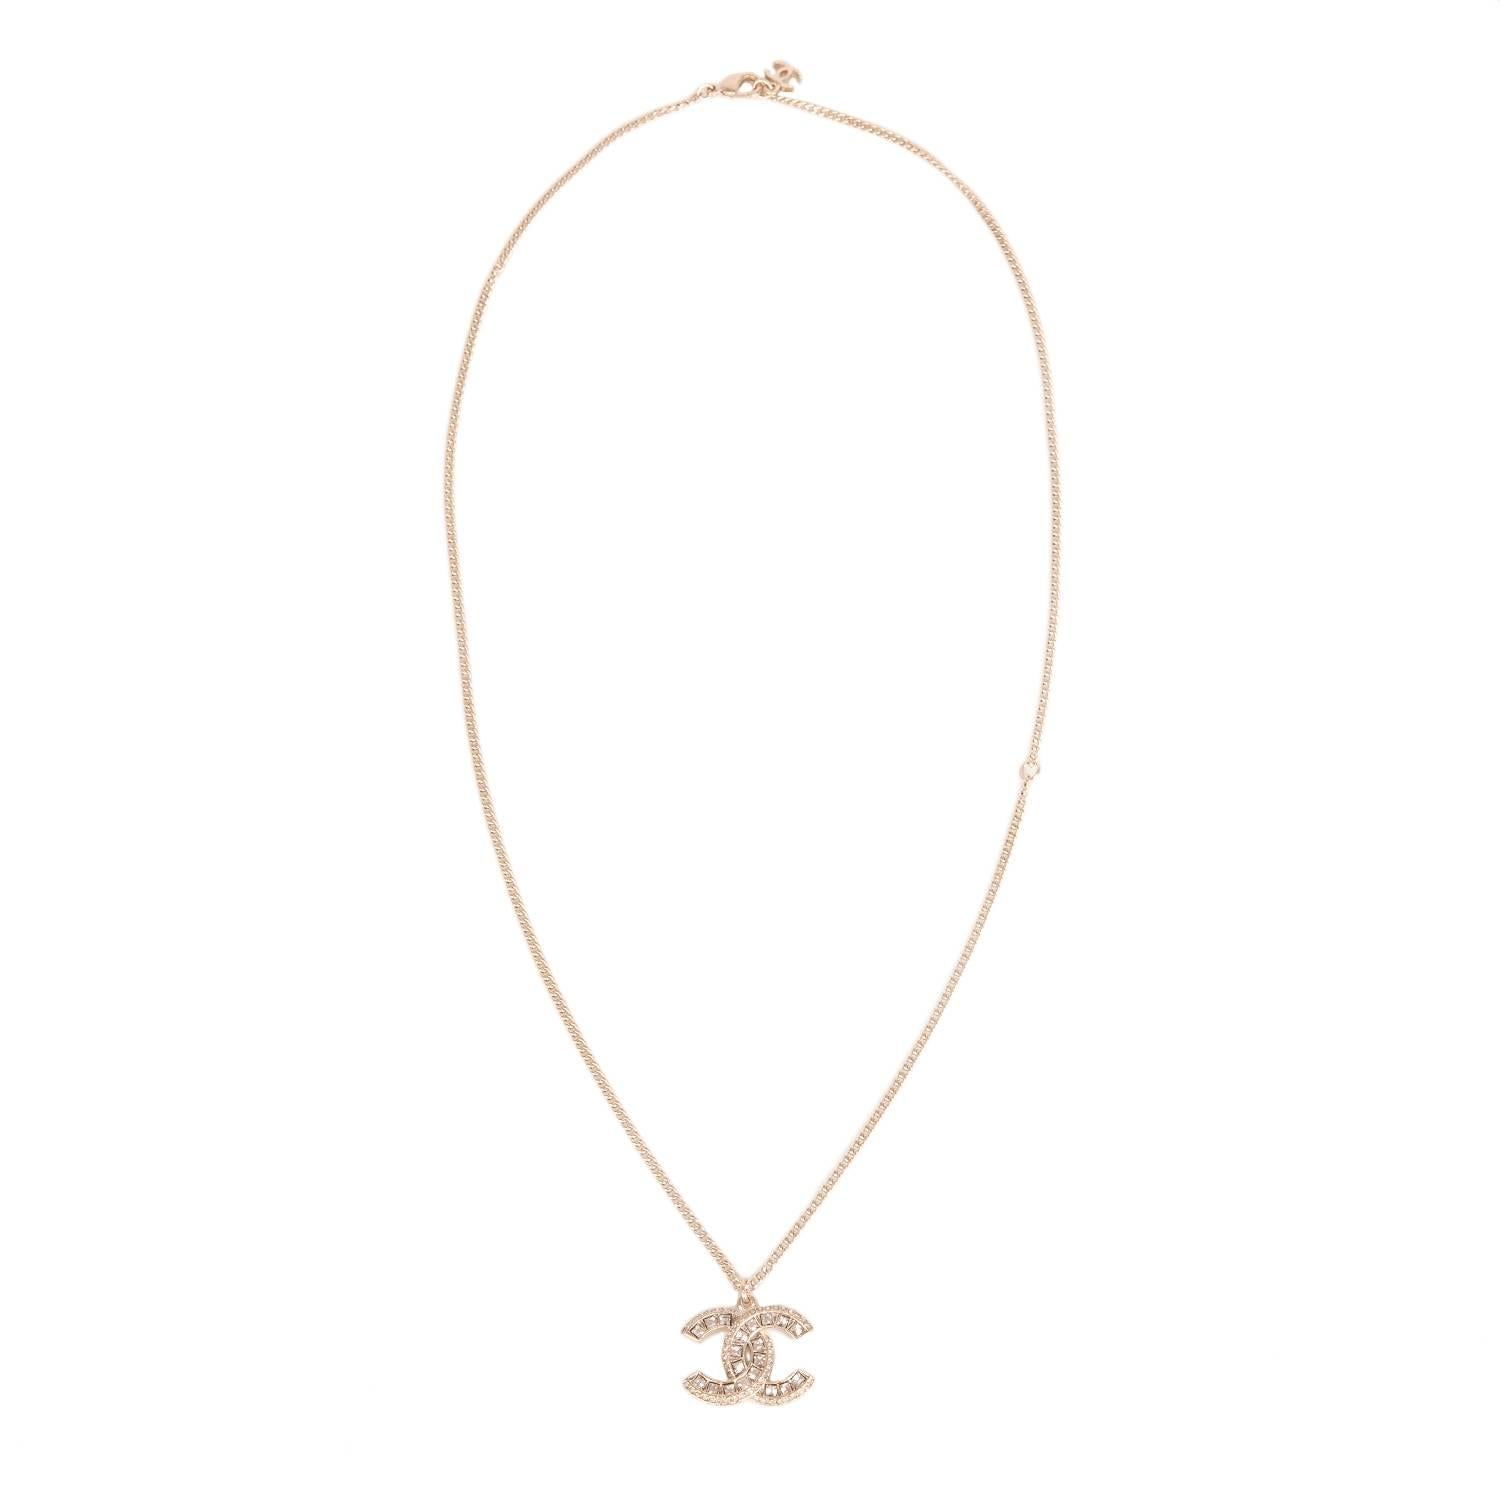 Chanel Swarovski crystal embedded light gold tone logo pendant on a light gold tone chain with a lobster claw closure and dangling CC charm at back.

Collection: 16A

Condition: Pristine; never worn

Accompaned By: Chanel box and